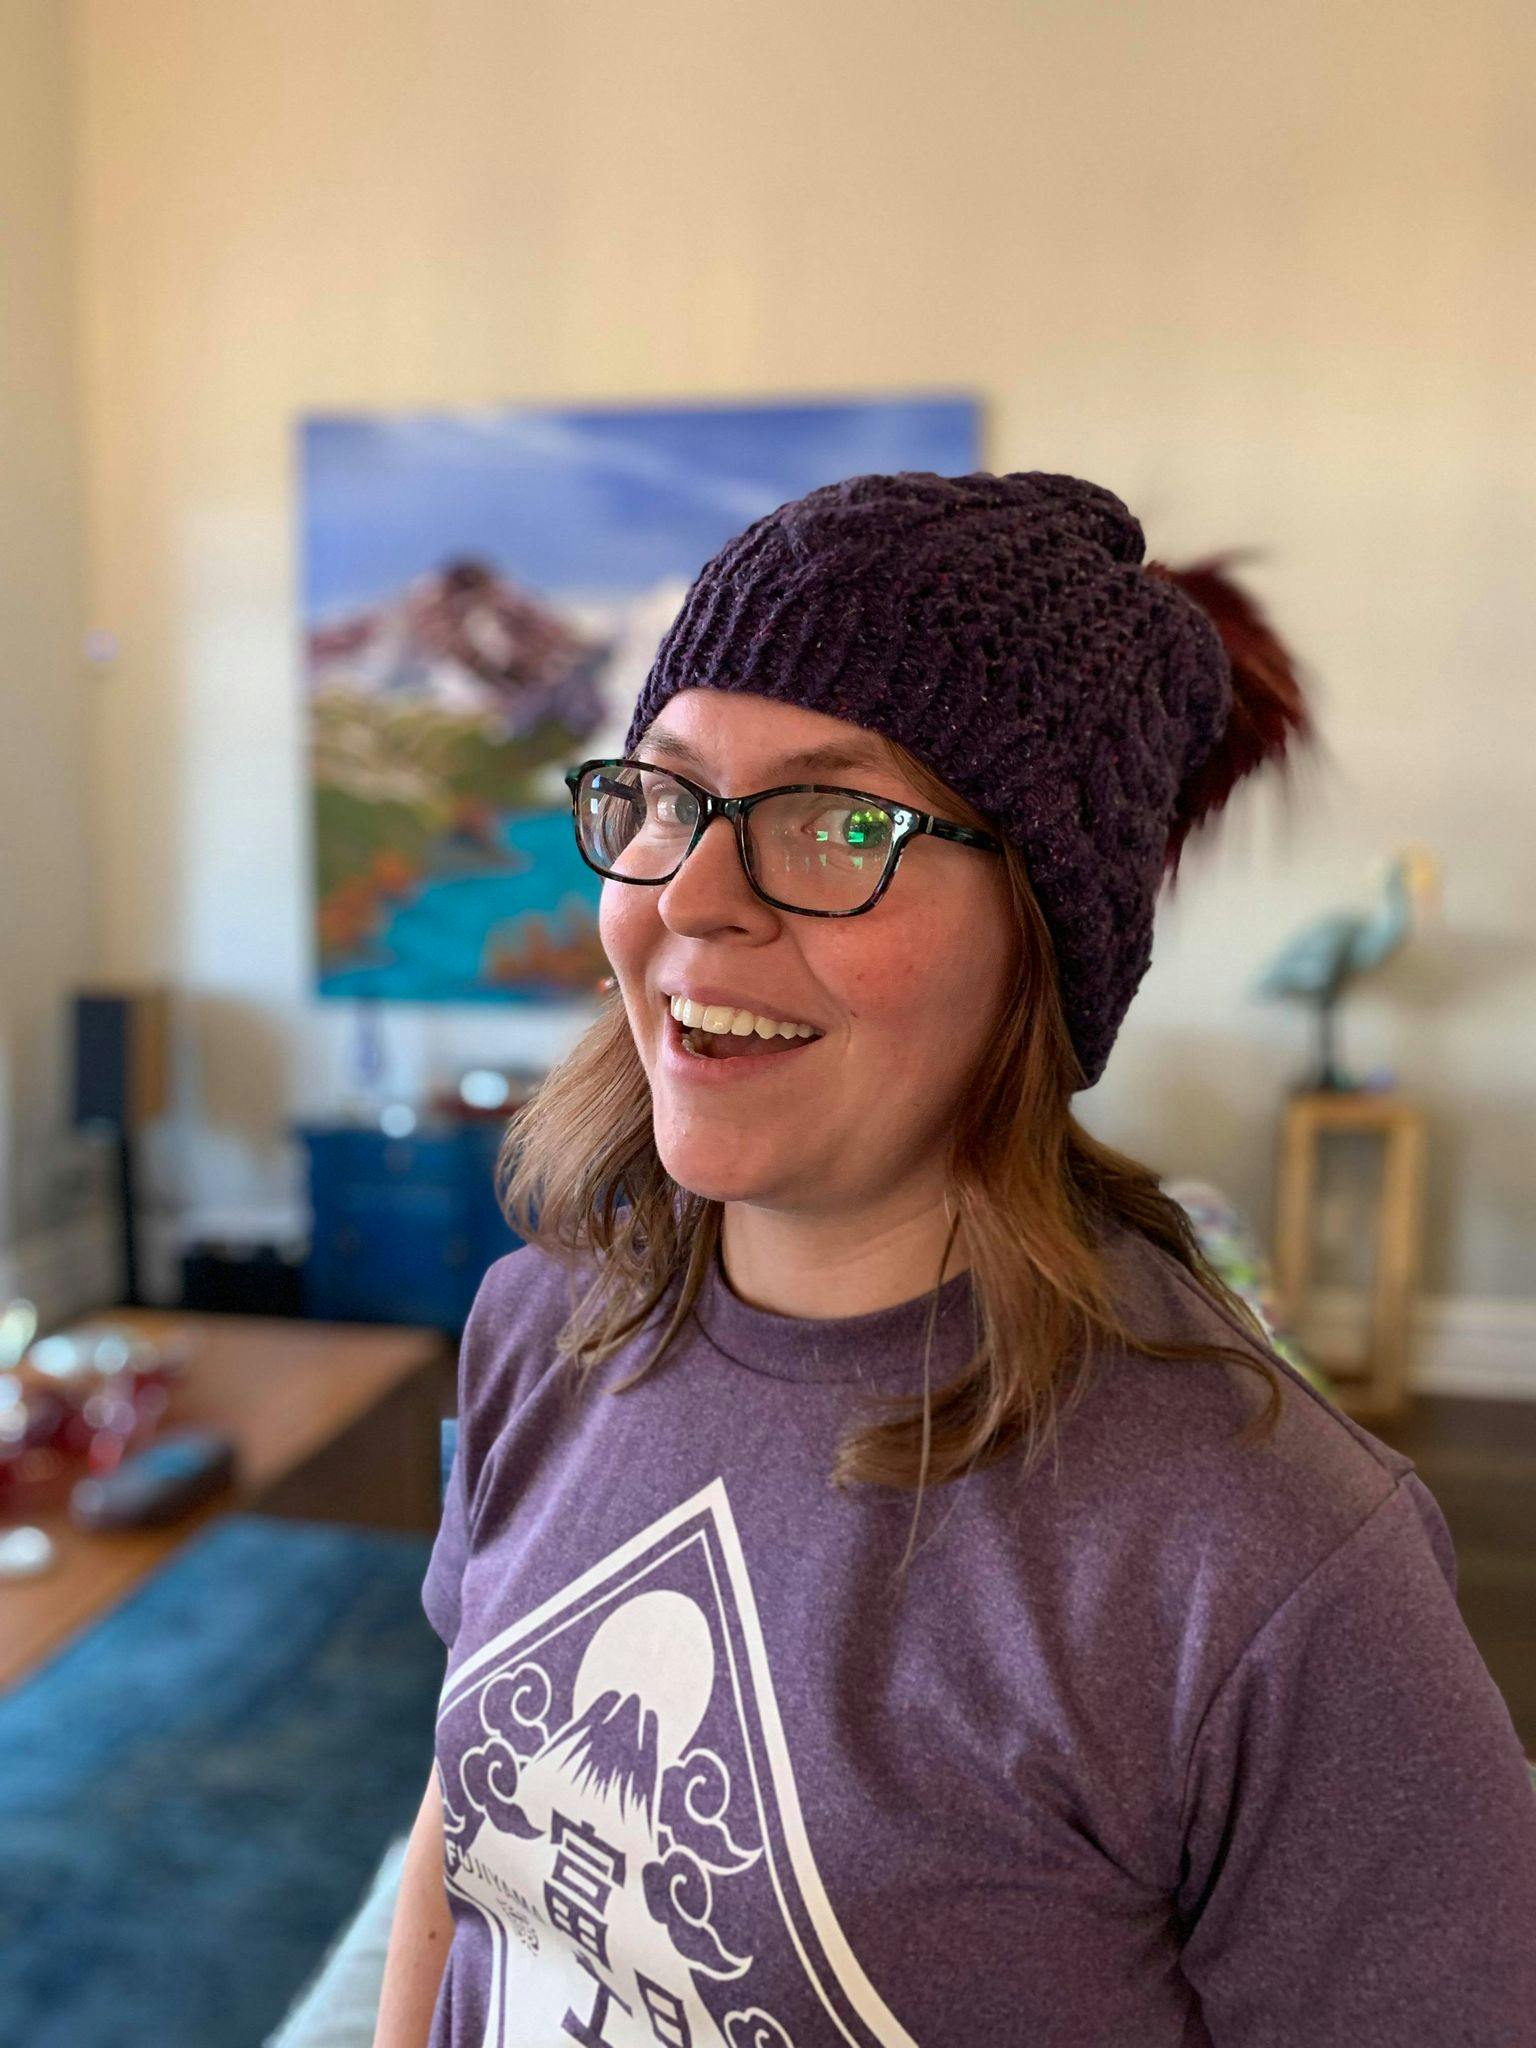 A picture of Theresa Pinhey smiling at the camera. Theresa has long brown hair, green eyes, and she's wearing dark blue glasses. She is wearing a purple knit hat and a purple t-shirt